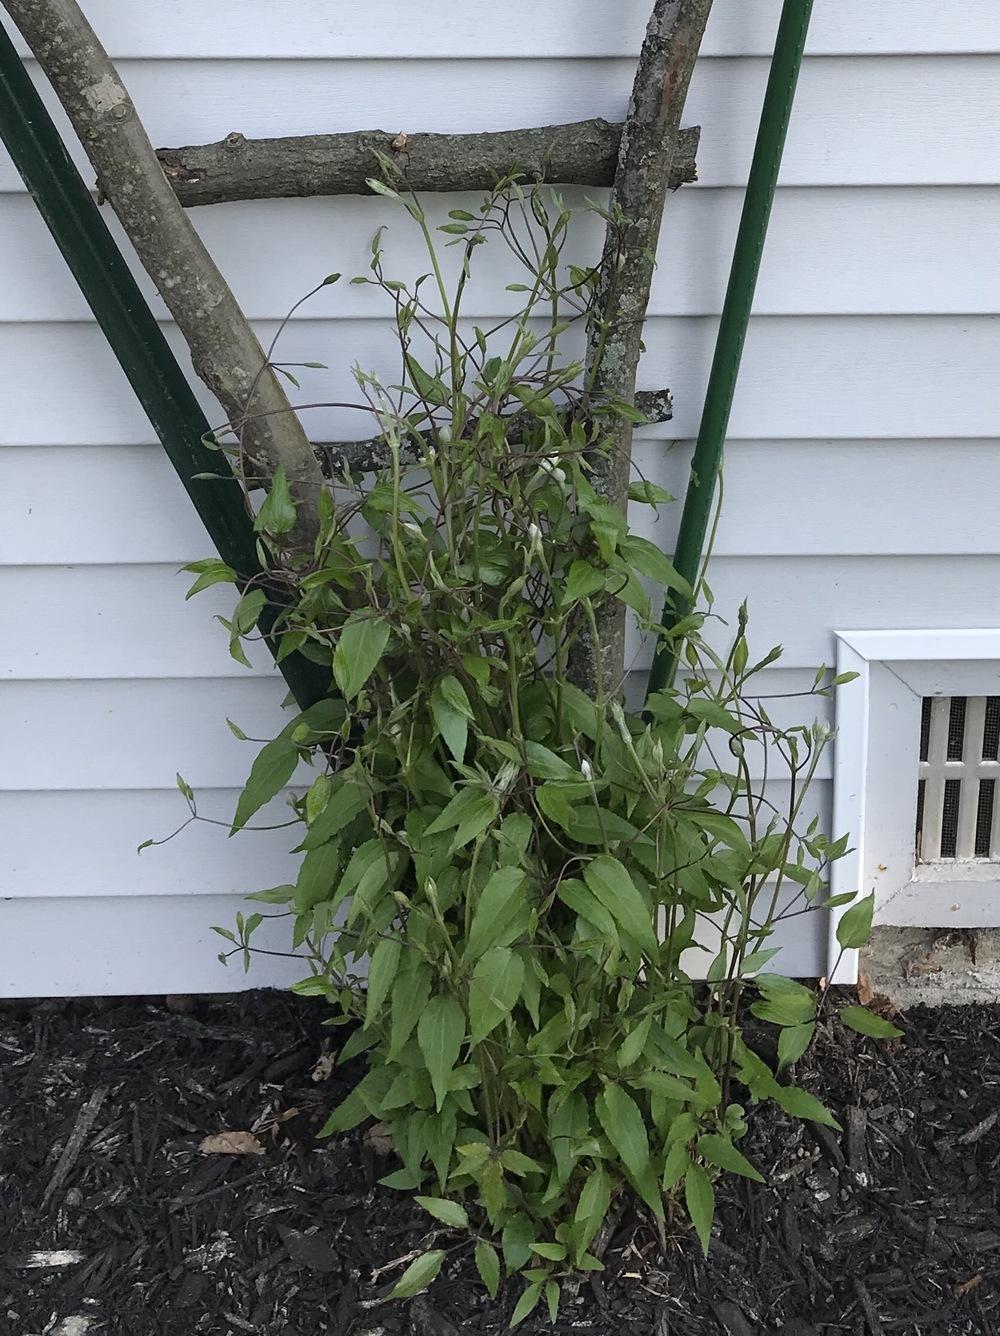 Photo of Clematis 'H.F. Young' uploaded by Michelezie